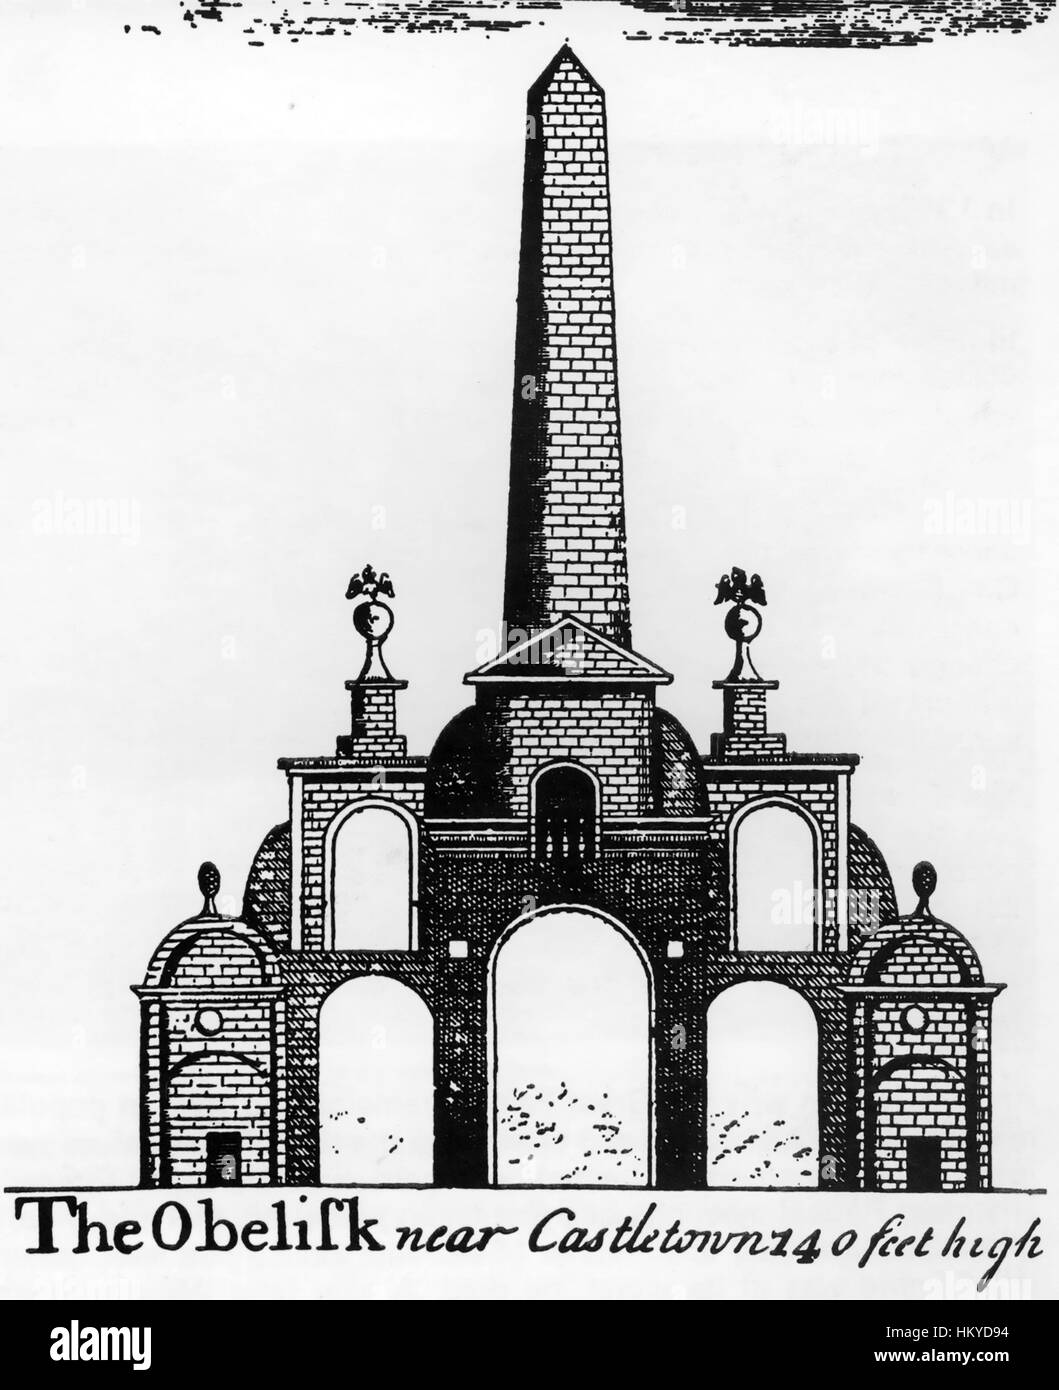 CONOLLY'S FOLLY, Maynooth, County Kildare, designed by Richard Castle,  soon after construction  in 1740-1741 to provide  local employment during a famine. Stock Photo